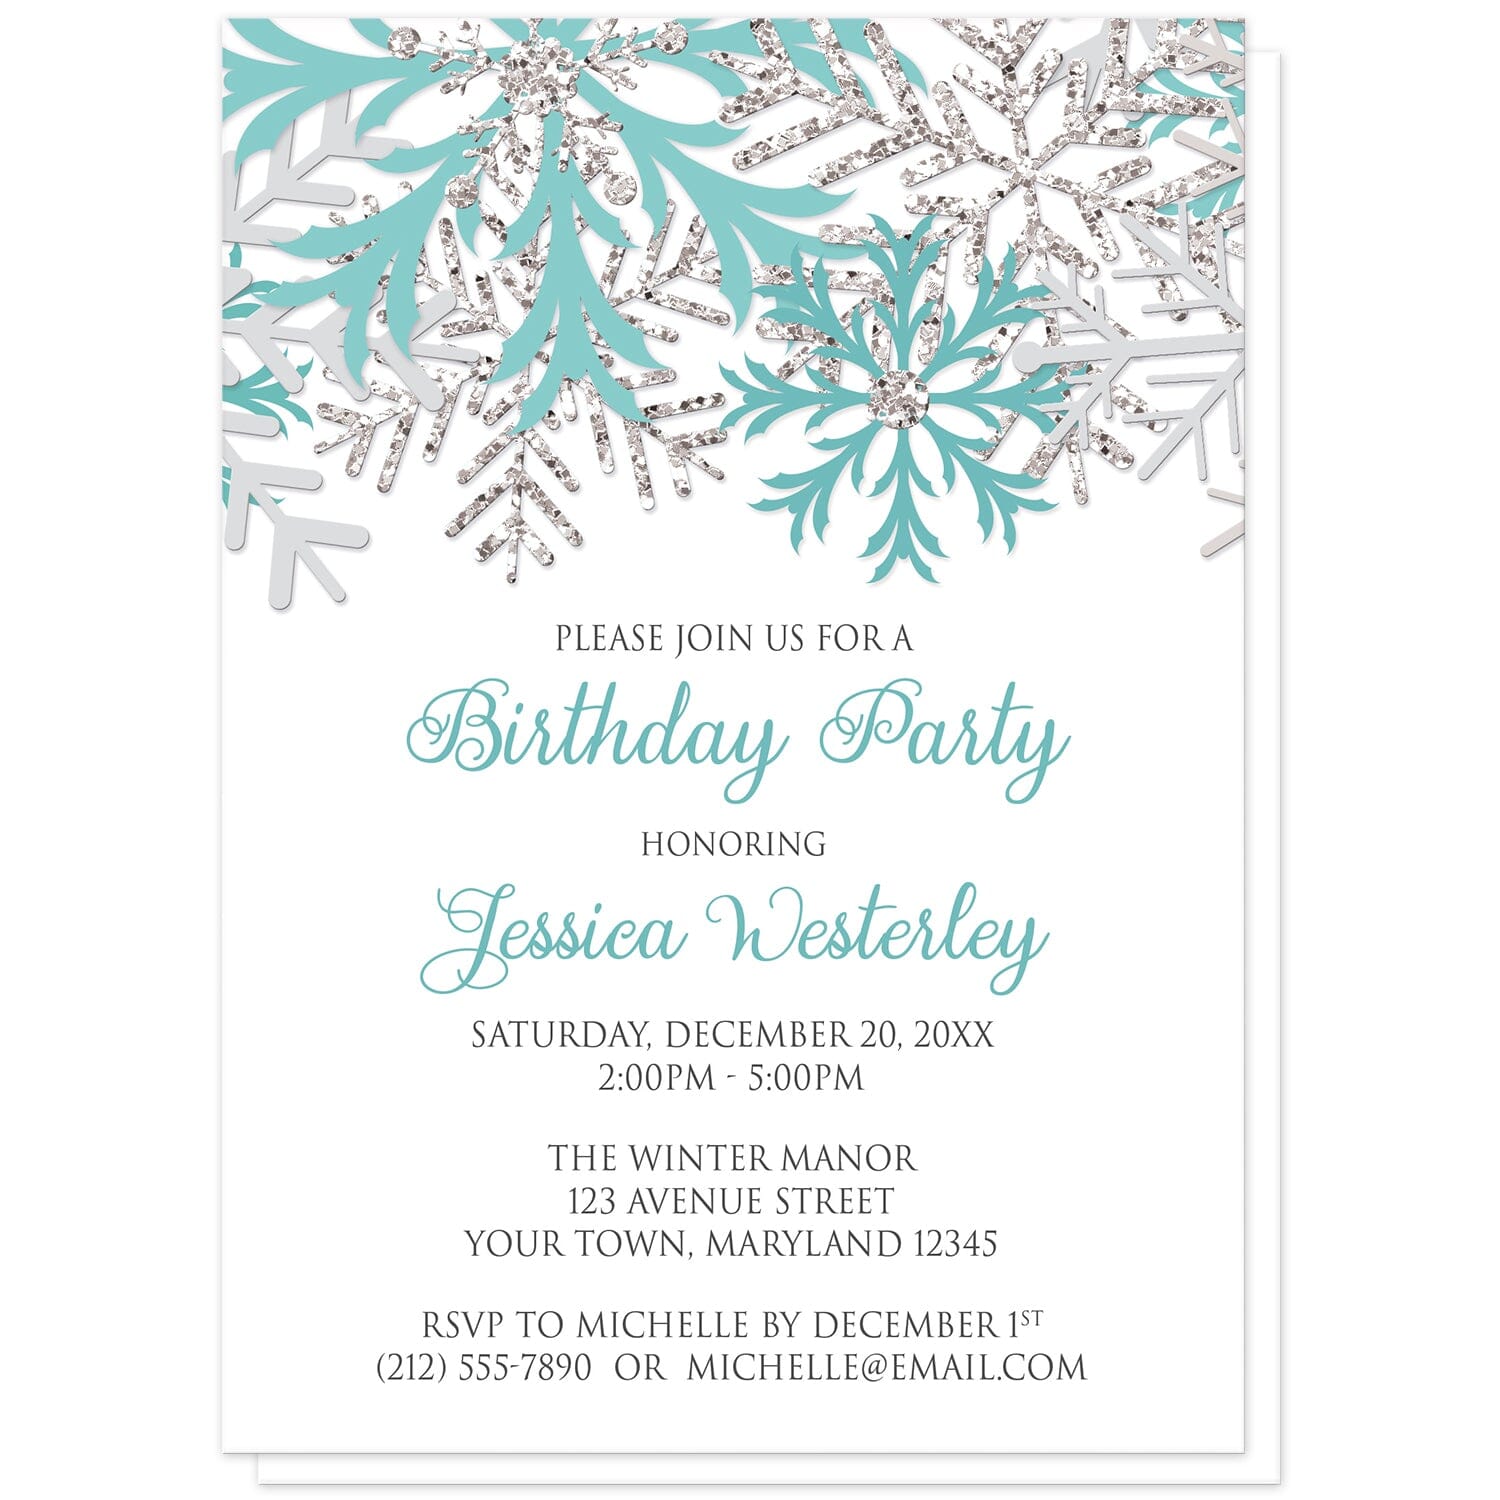 Winter Teal Silver Snowflake Birthday Party Invitations at Artistically Invited. Beautiful winter teal silver snowflake birthday party invitations designed with teal, light teal, silver-colored glitter-illustrated, and light gray snowflakes along the top over a white background. Your personalized birthday celebration details are custom printed in teal and gray below the pretty snowflakes.